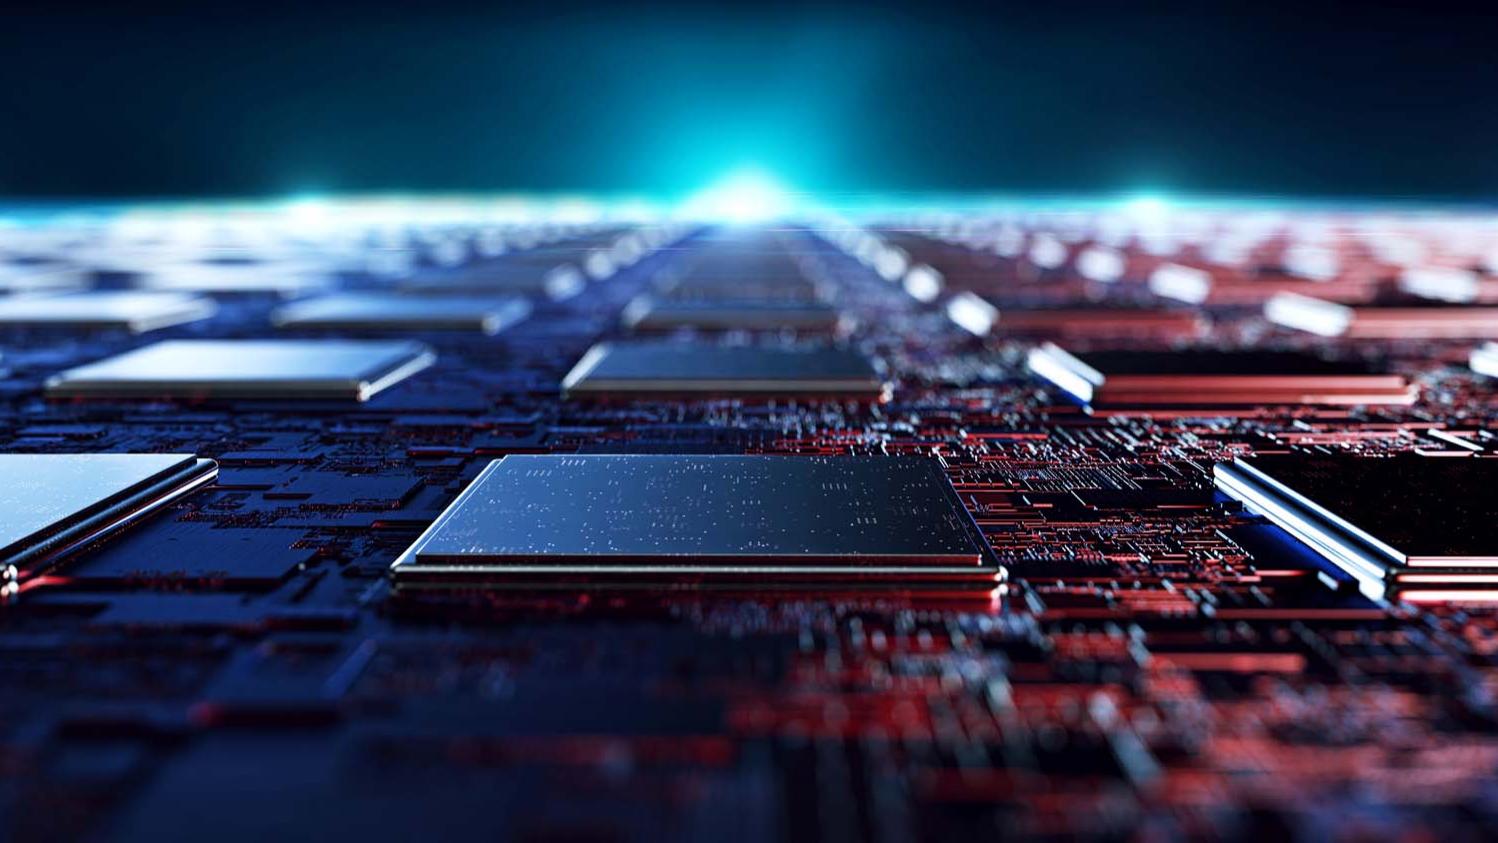 Microchips enable state-of-the-art digital technologies